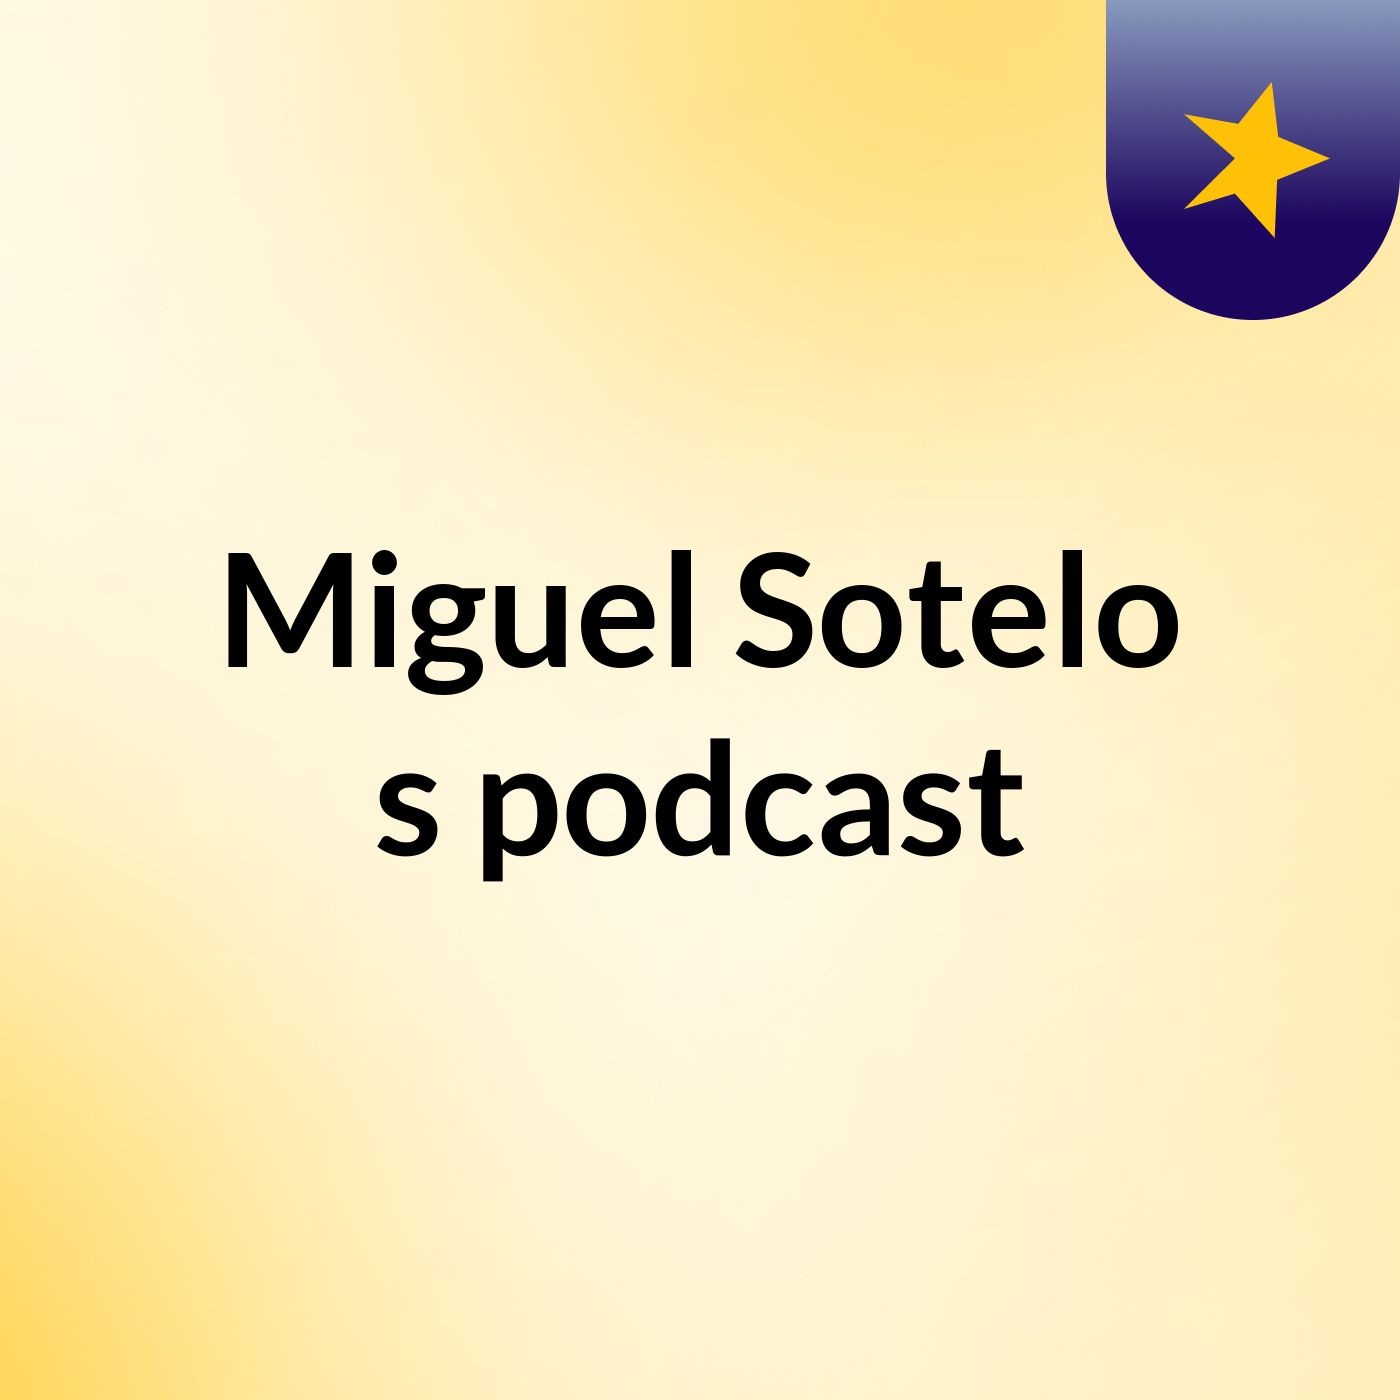 Miguel Sotelo's podcast